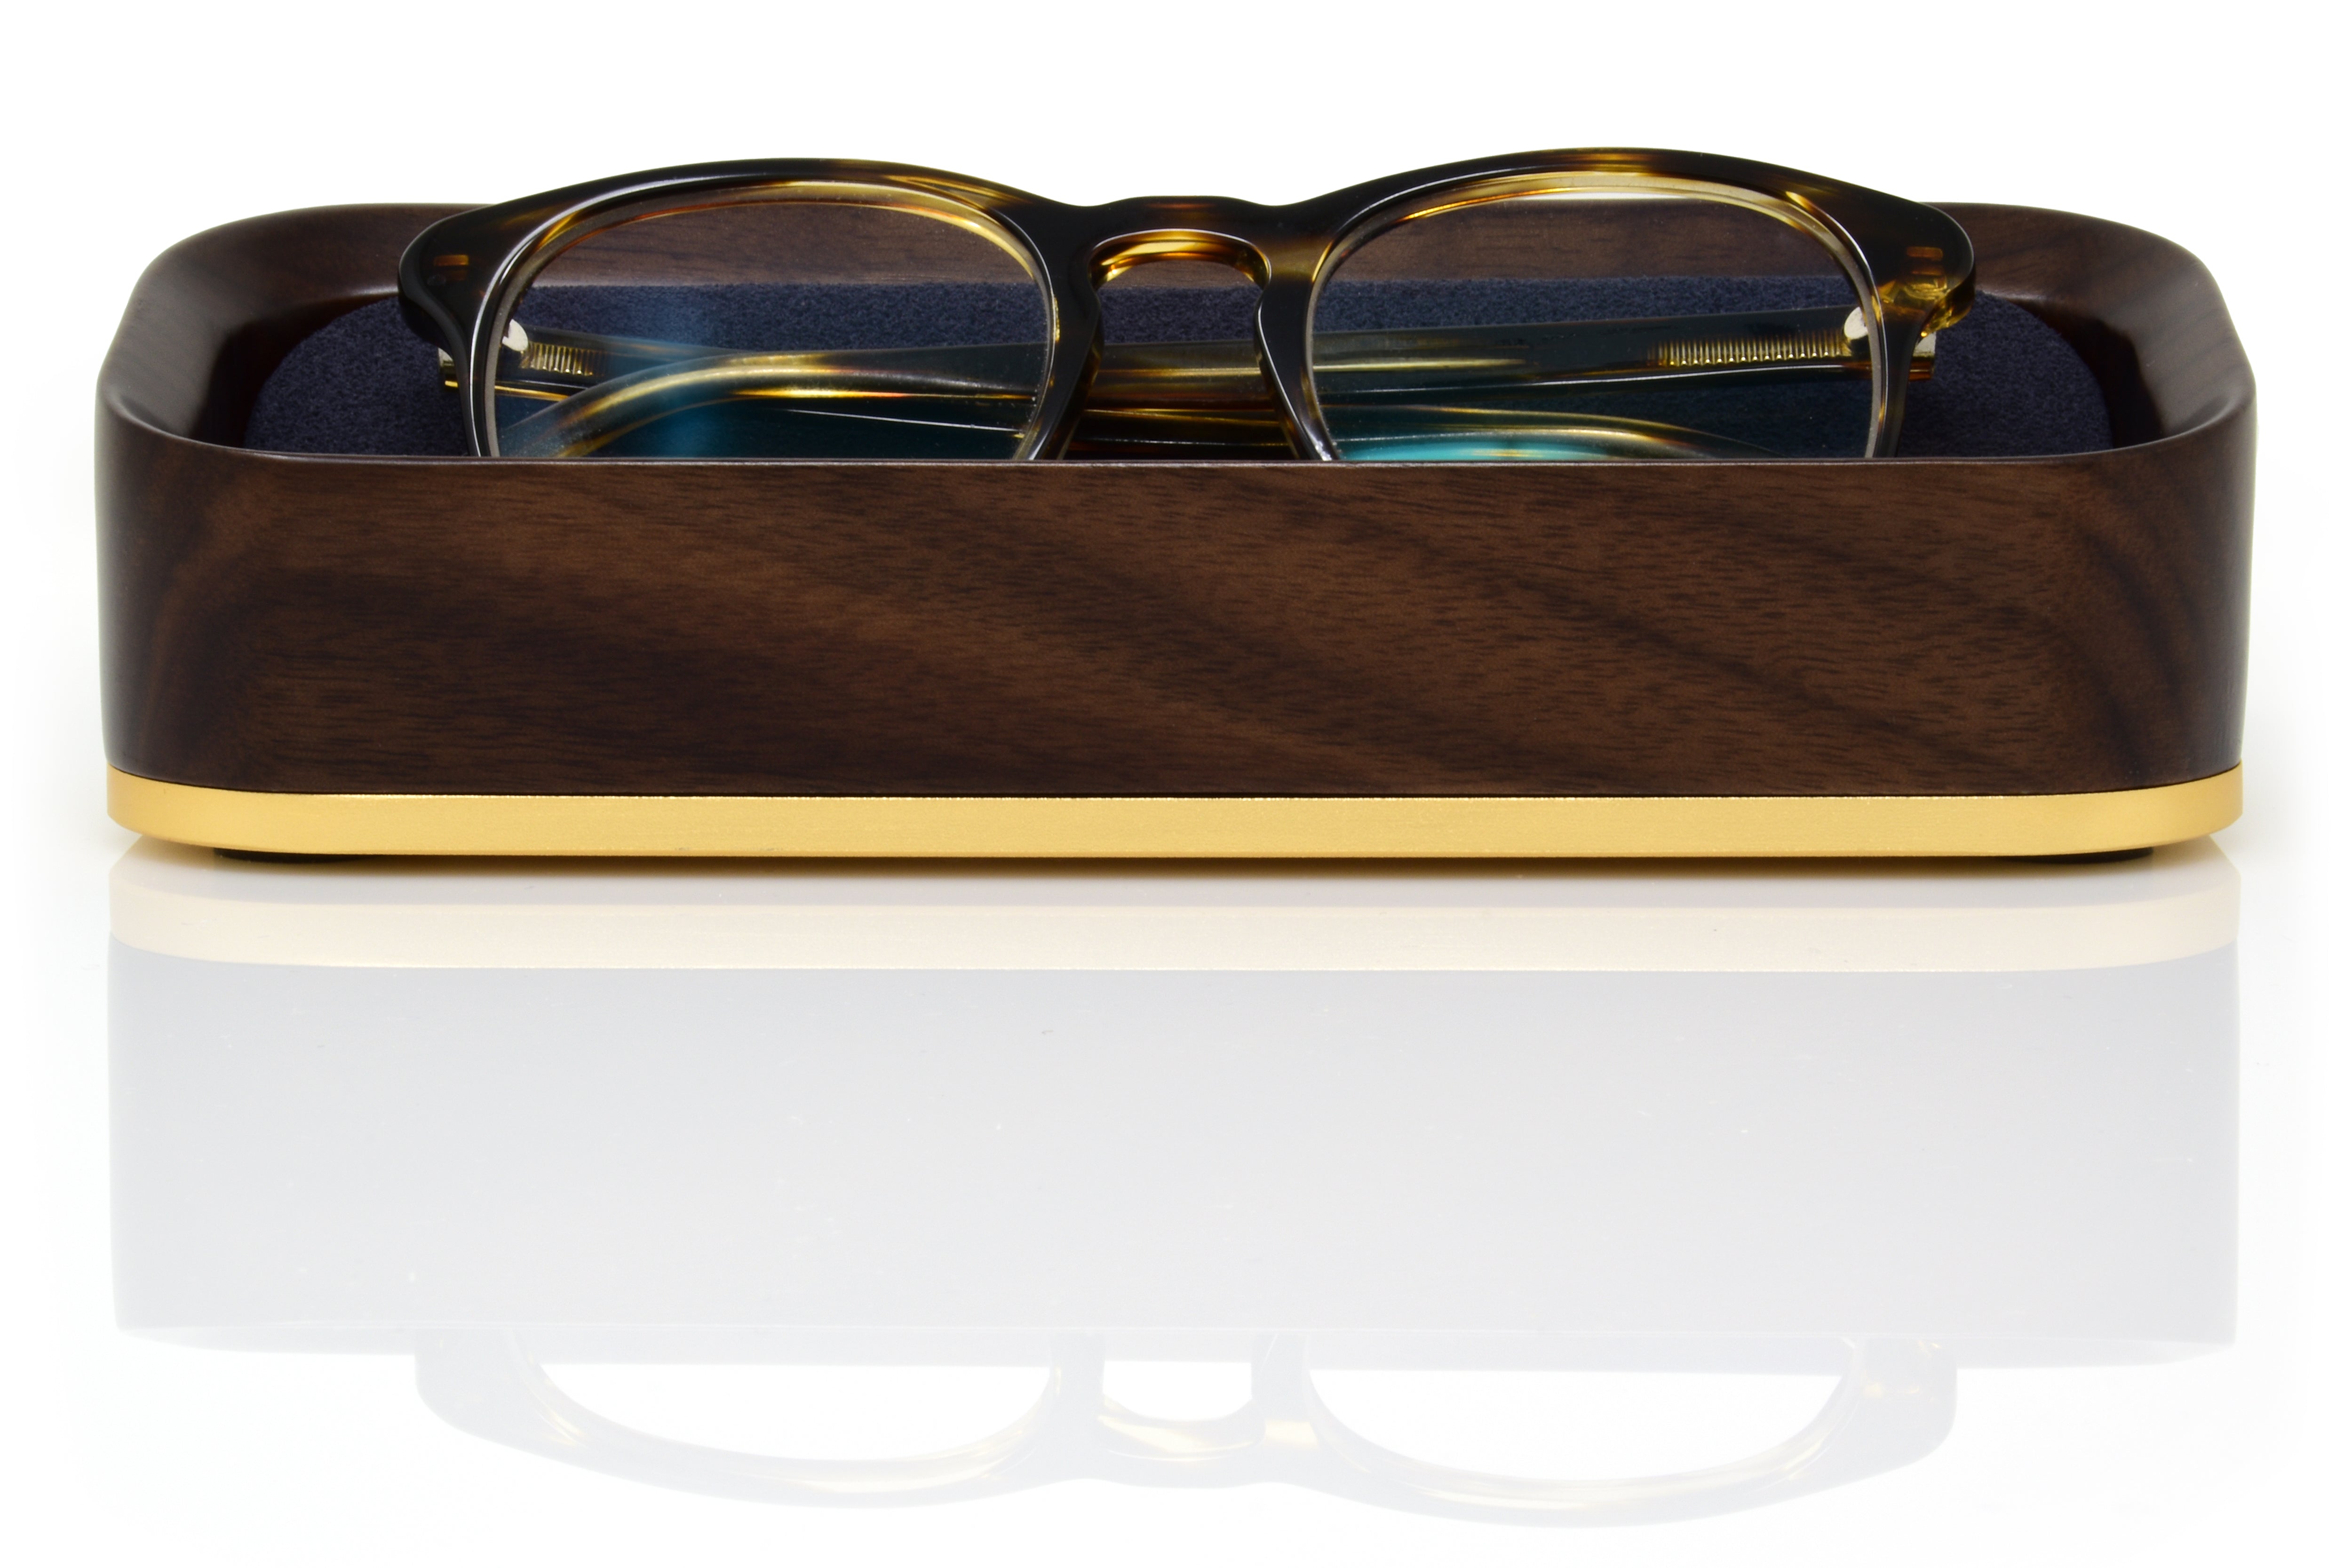 Front View Product Image of Italico Luxury Glasses Valet